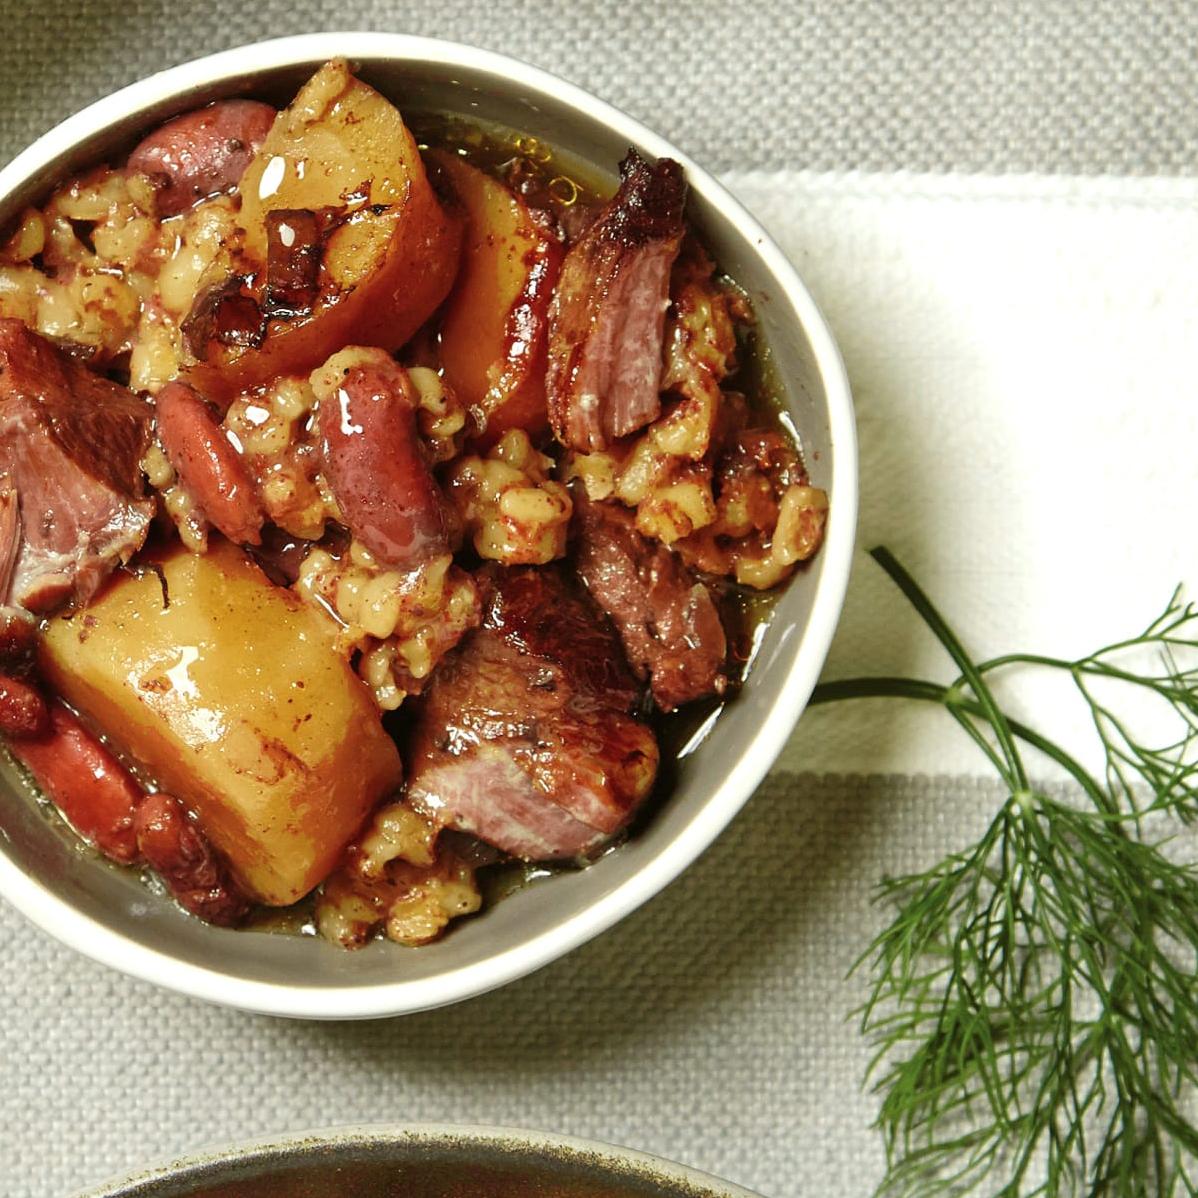  The aroma of this slow-cooked dish will awaken your taste buds!